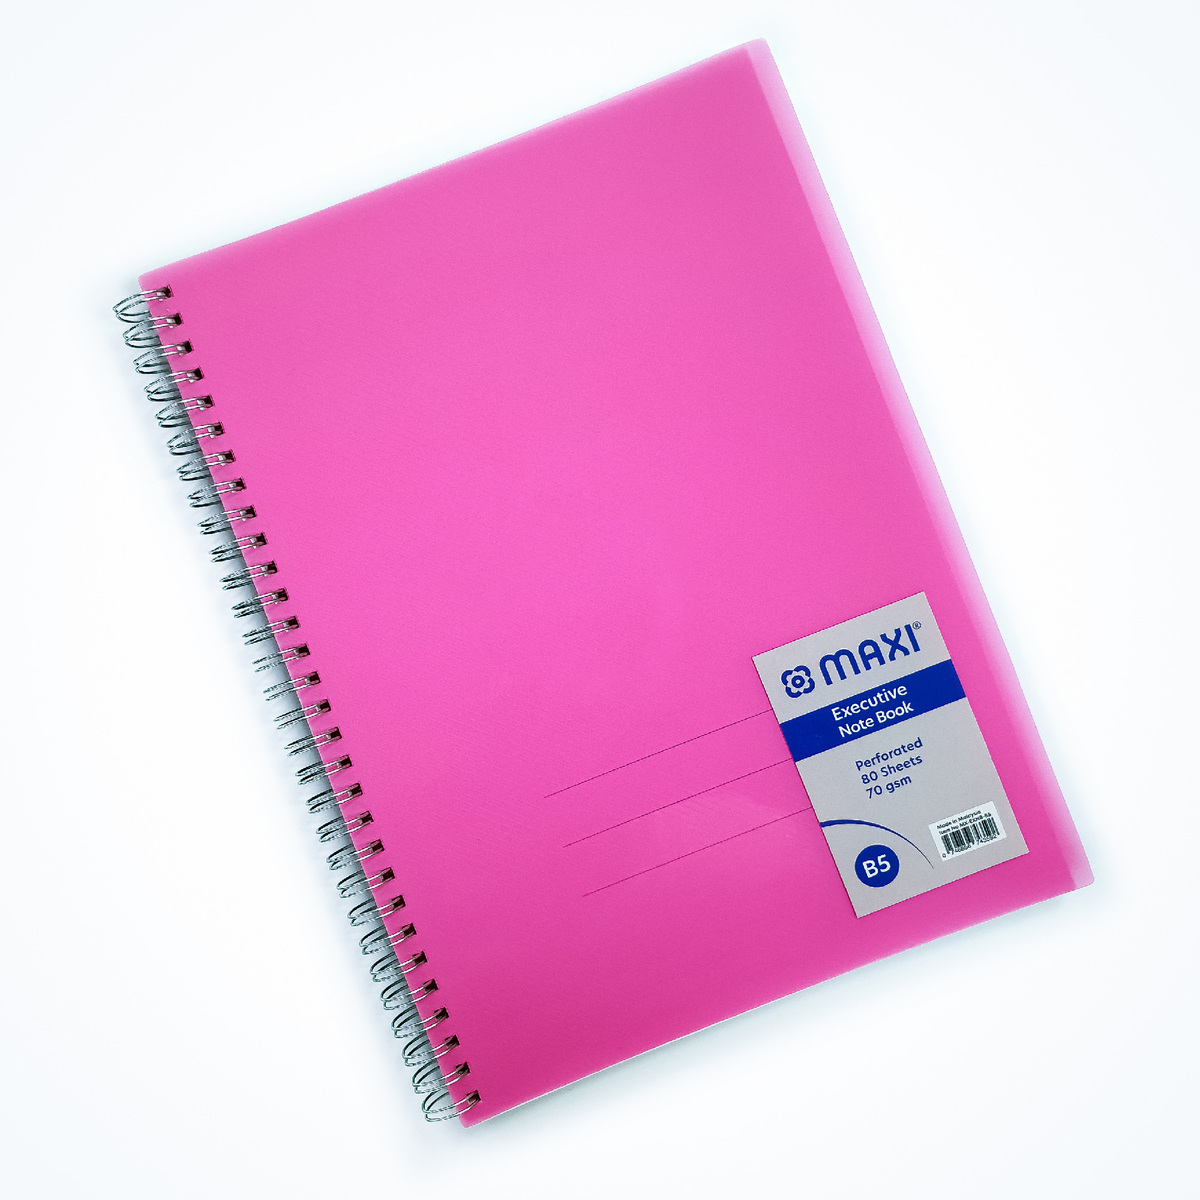 Maxi wire-o-colored polypropylene notebook B5 Siez, 80 sheets, MX-EXNB-B5